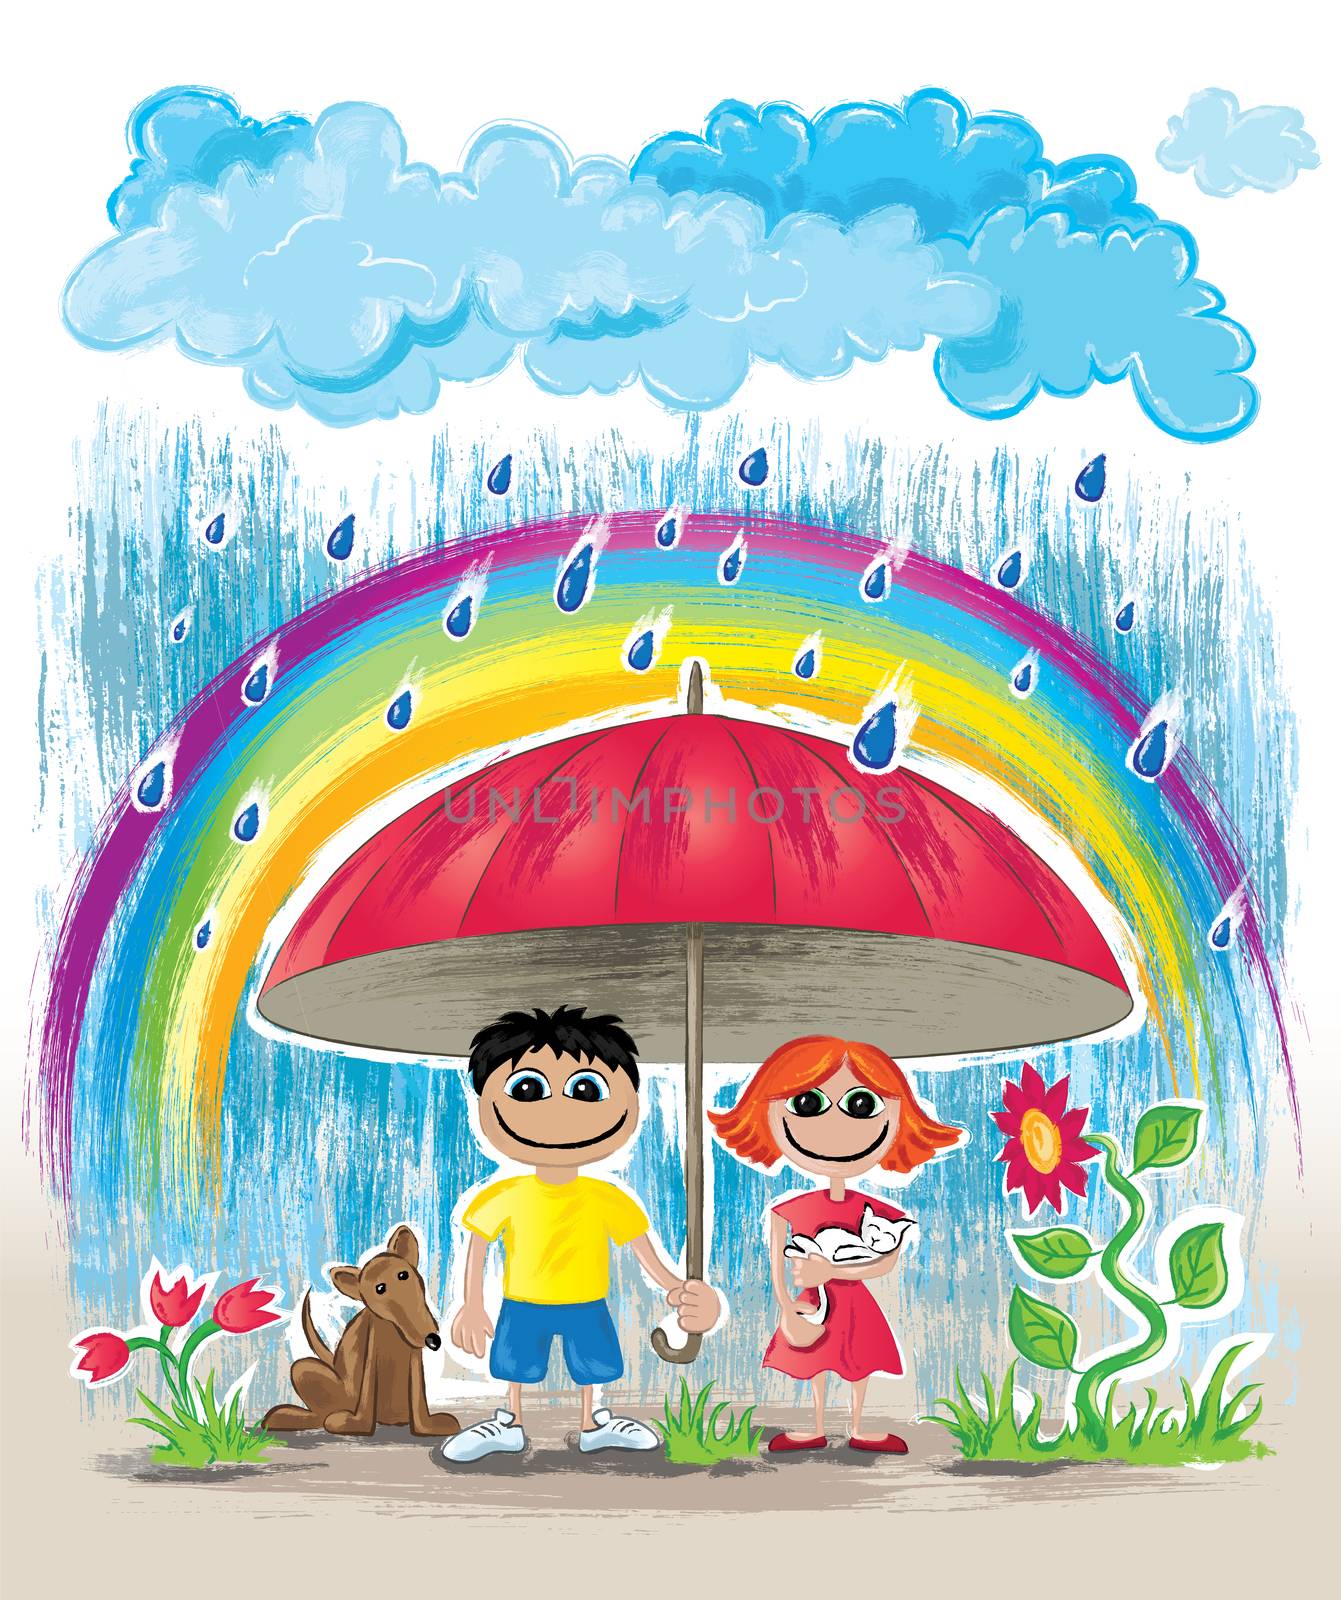 rainy day with rainbow kids with pets hiding under umbrella wallpaper postcard